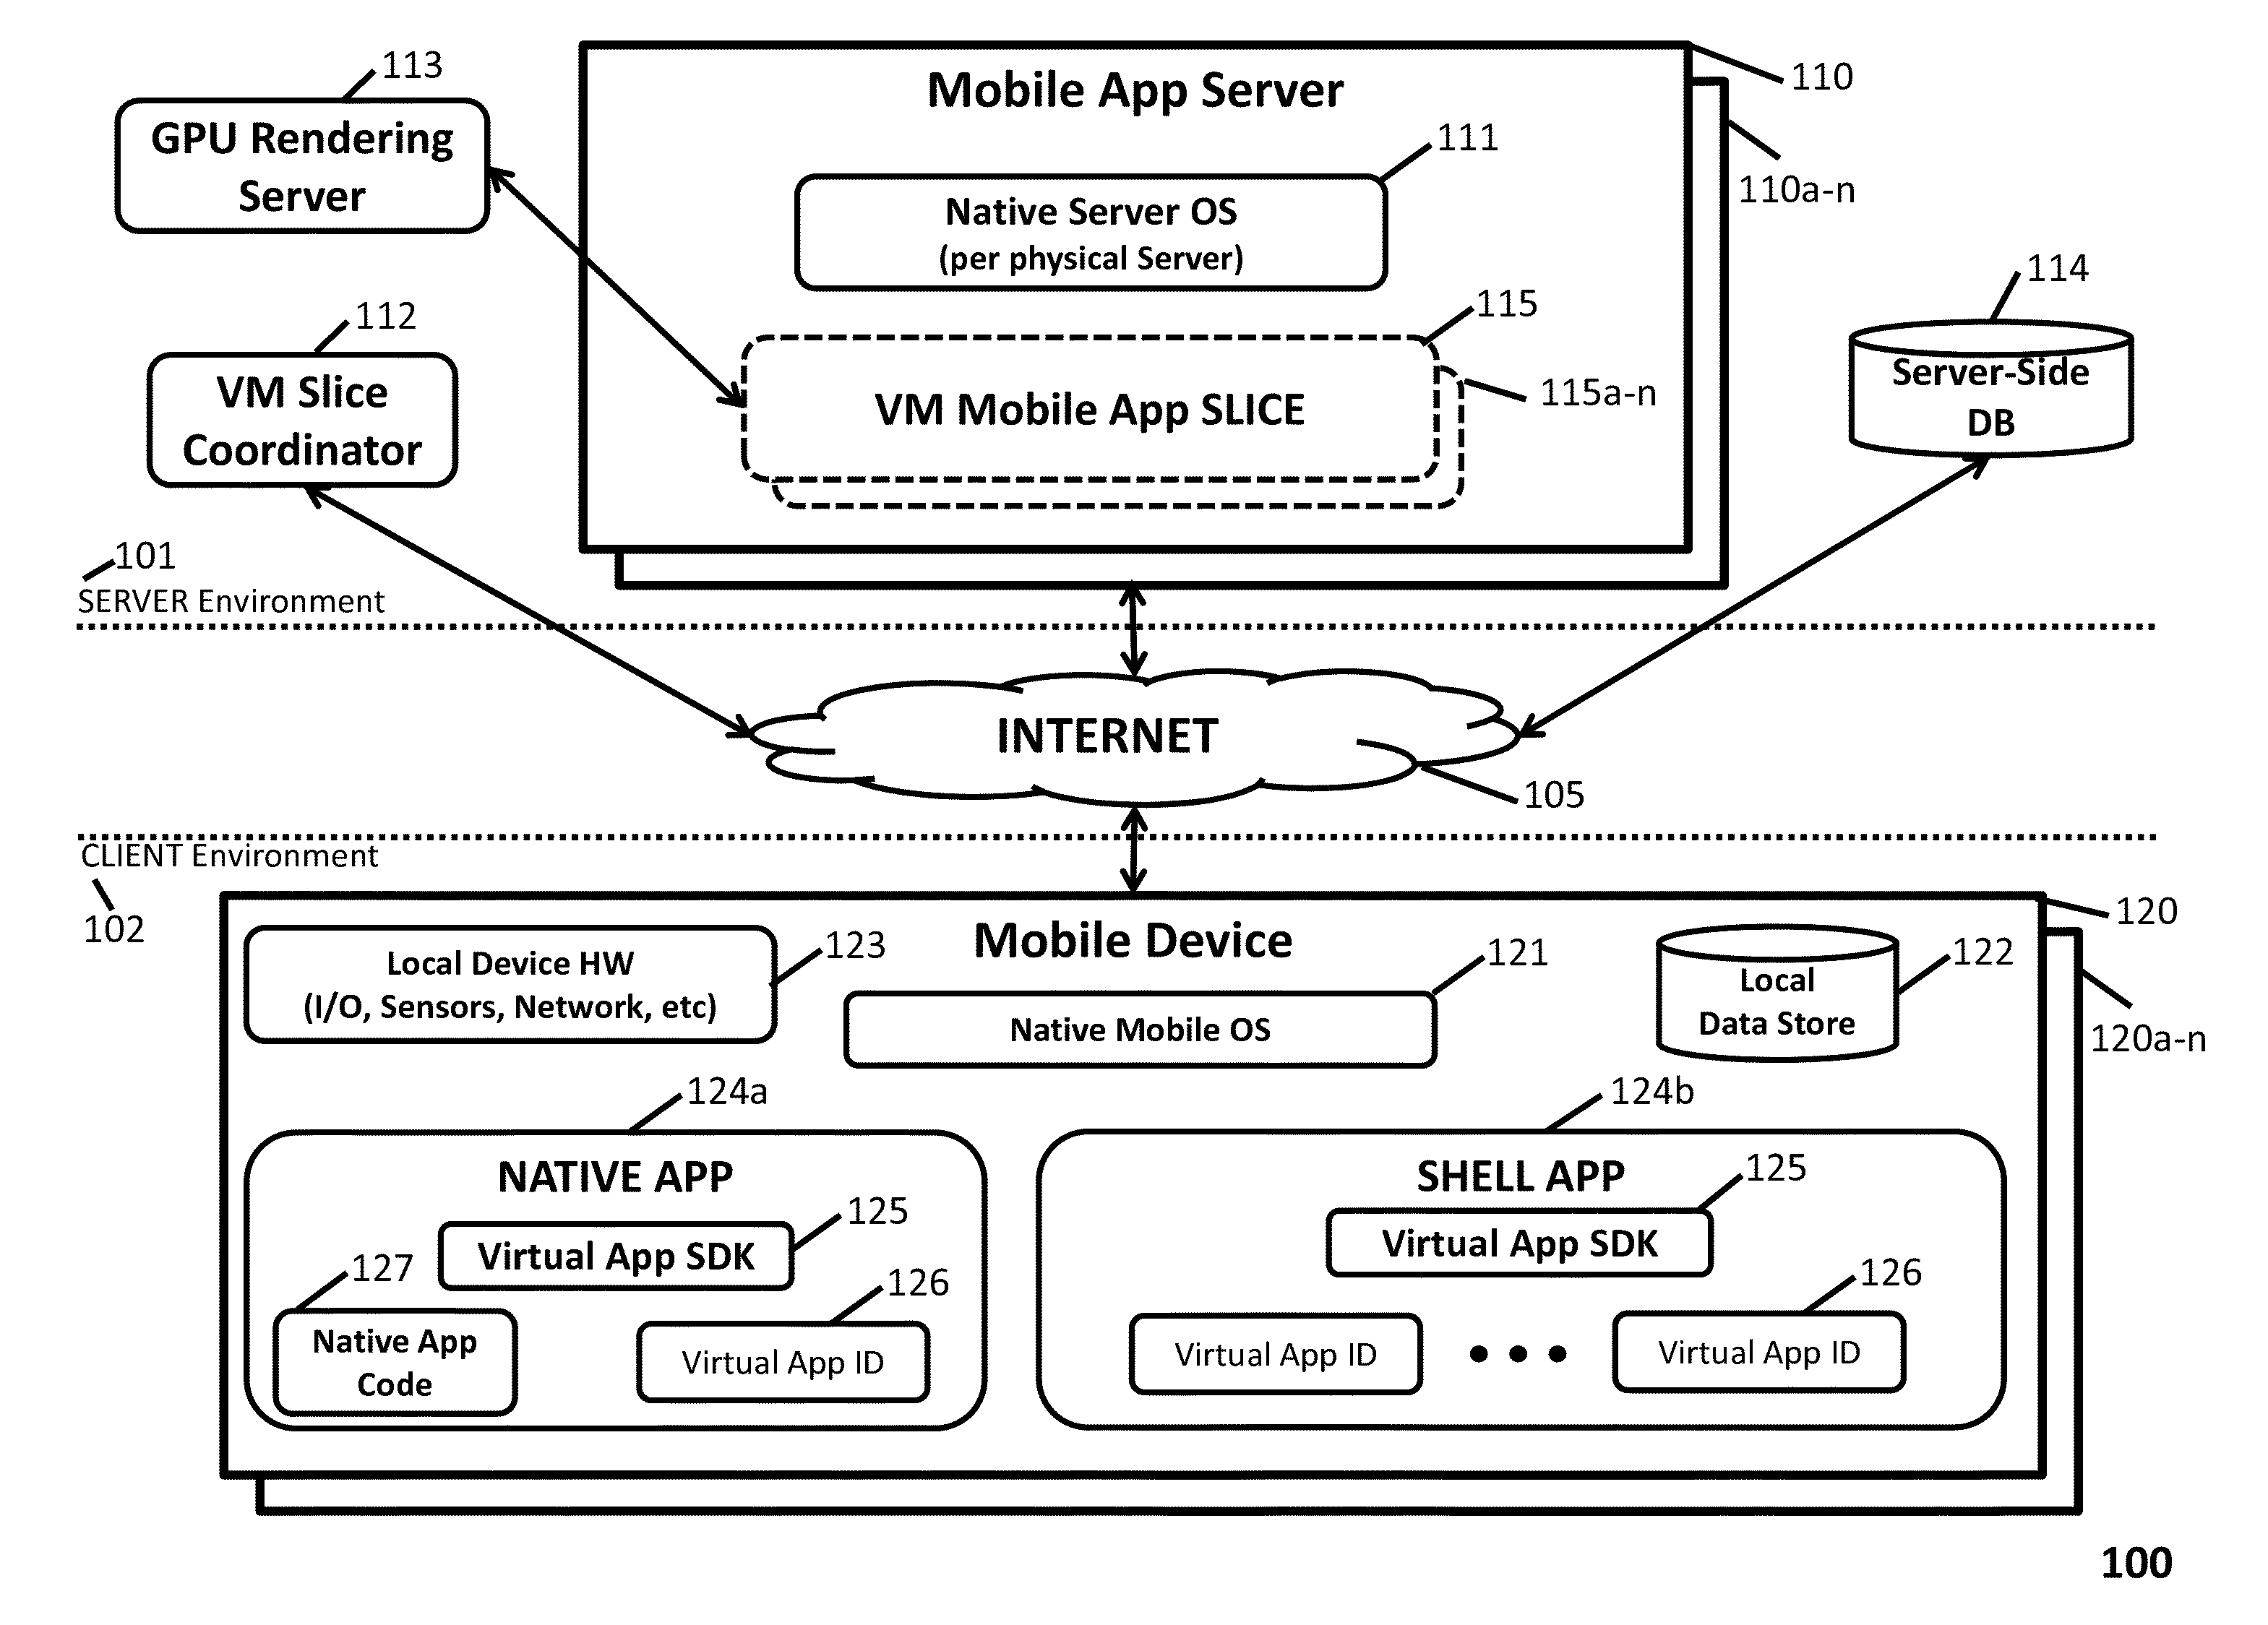 Remote Virtualization of Mobile Apps with Transformed Ad Target Preview